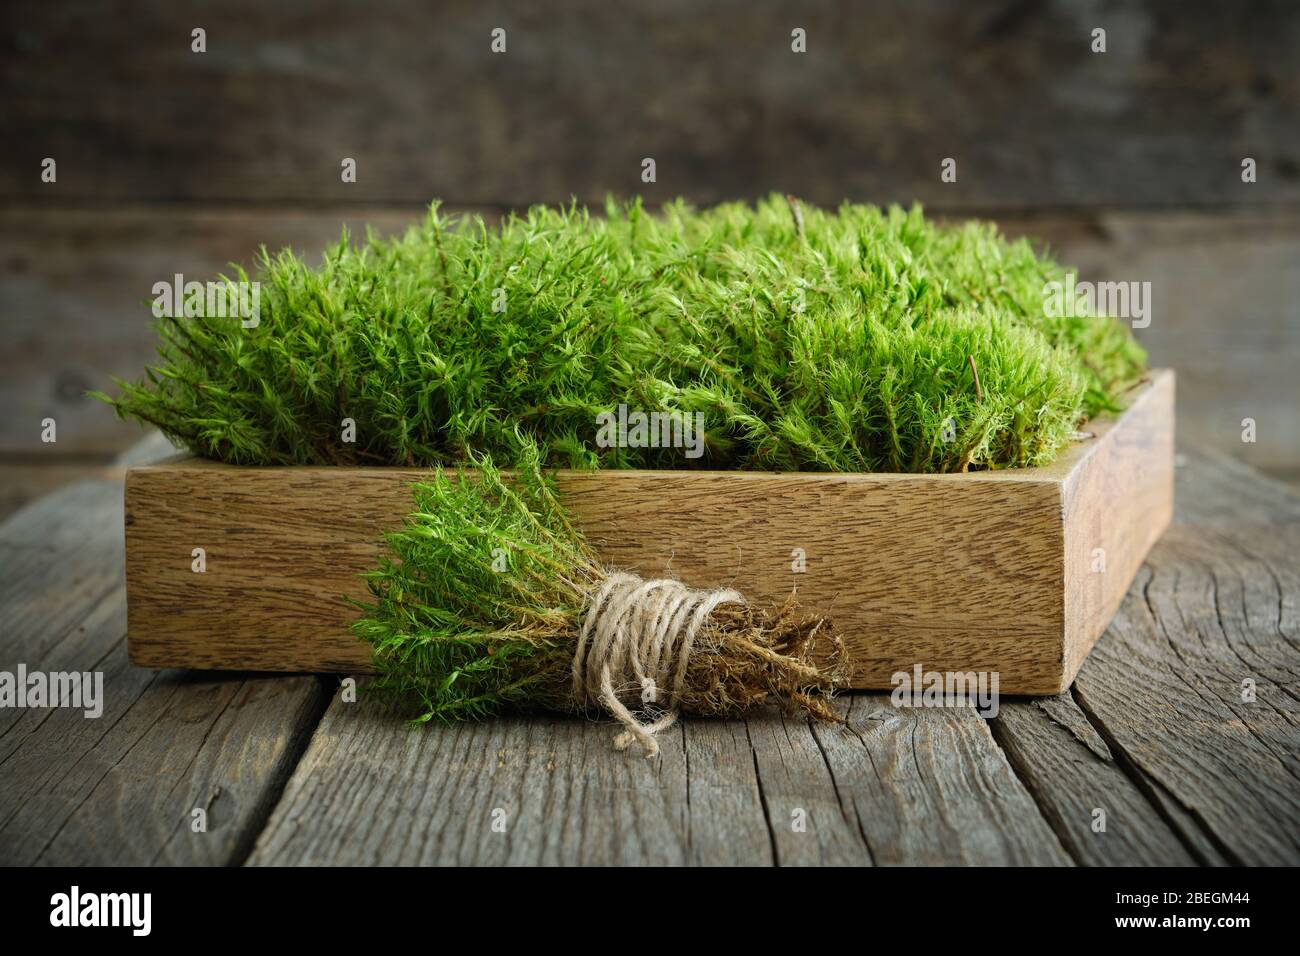 Common Haircap Moss in wooden crate on table. Stock Photo